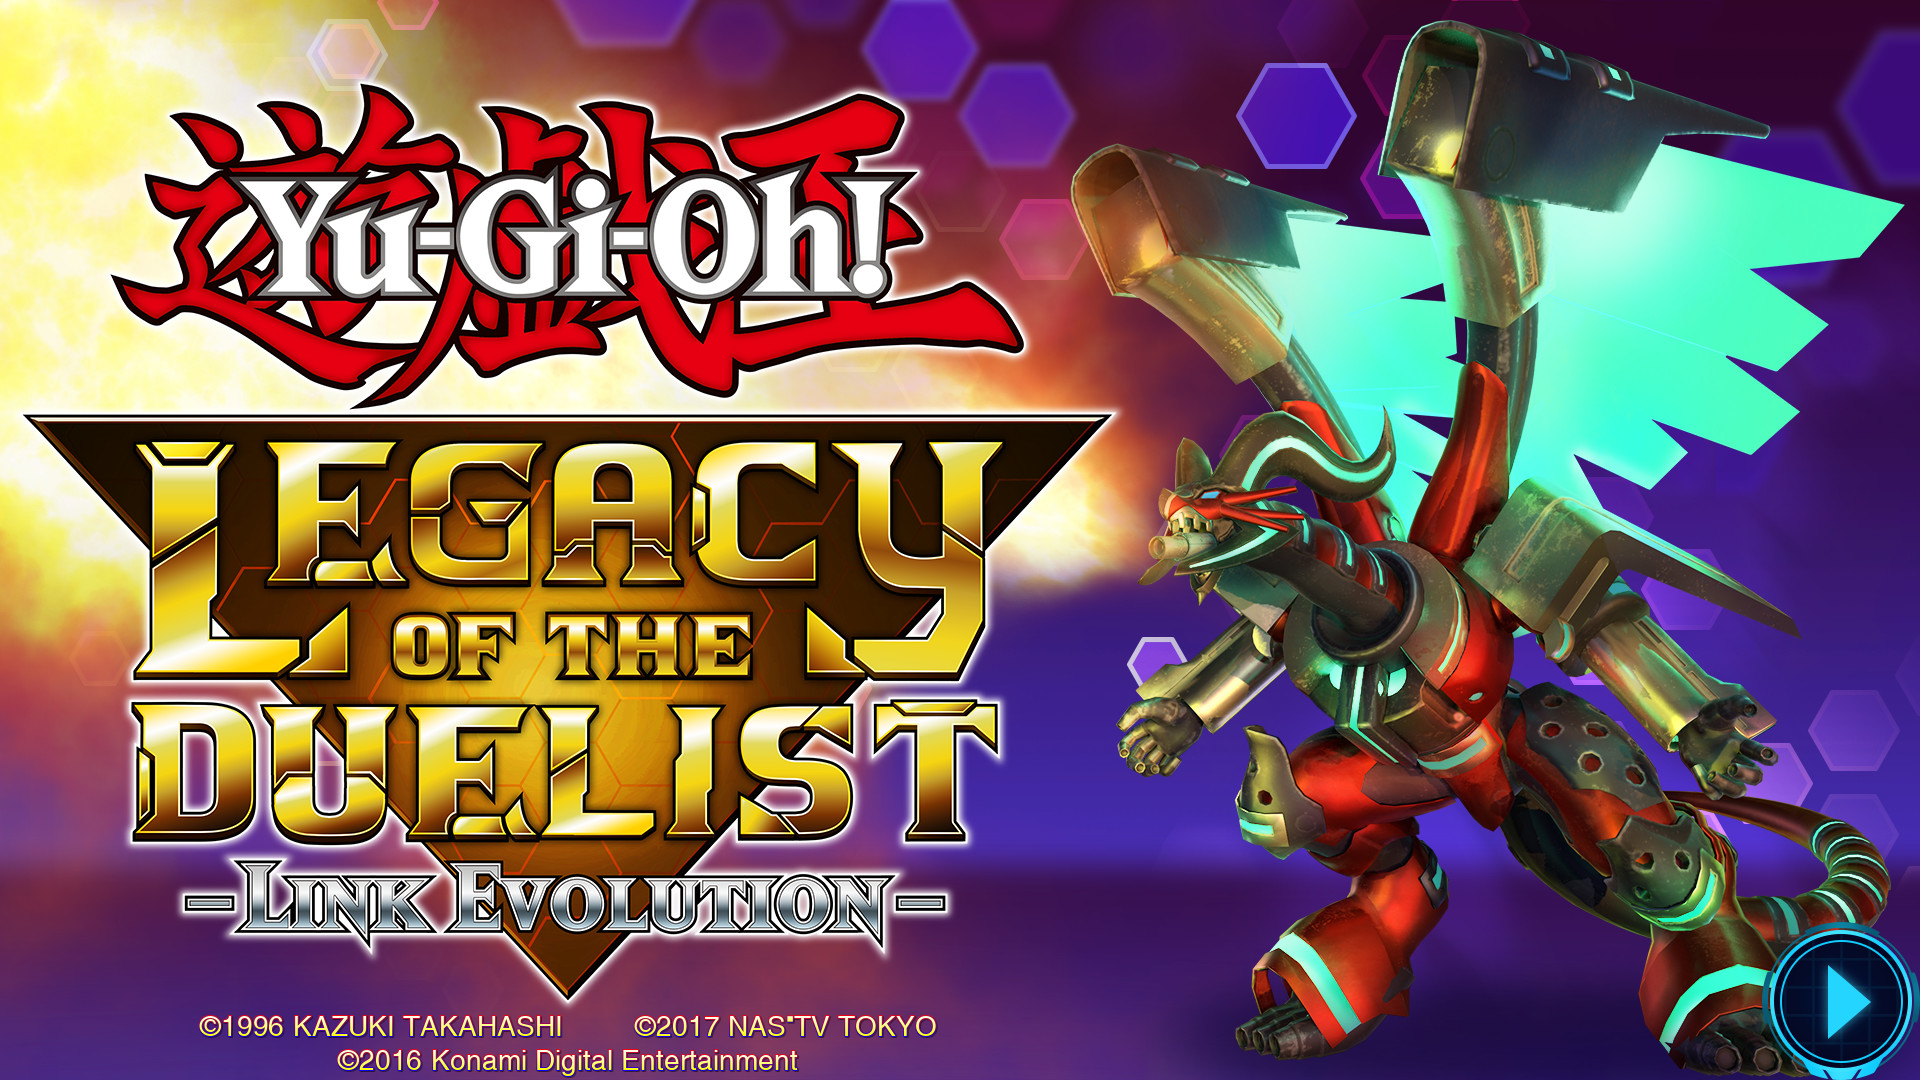 Yu-Gi-Oh! Legacy of the Duelist : Link Evolution on Steam